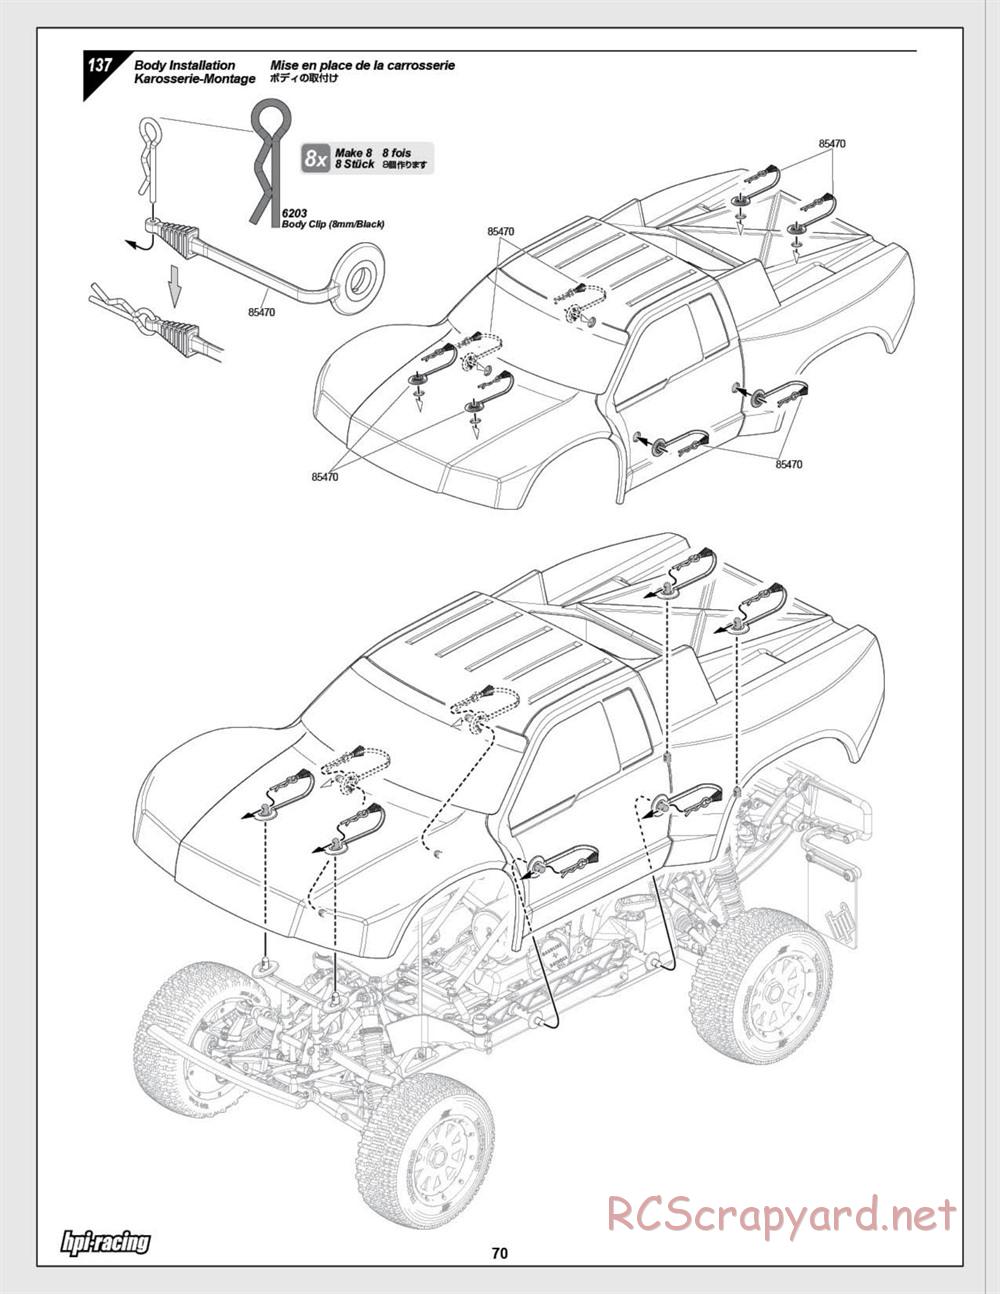 HPI - Baja 5SC SS - Exploded View - Page 70